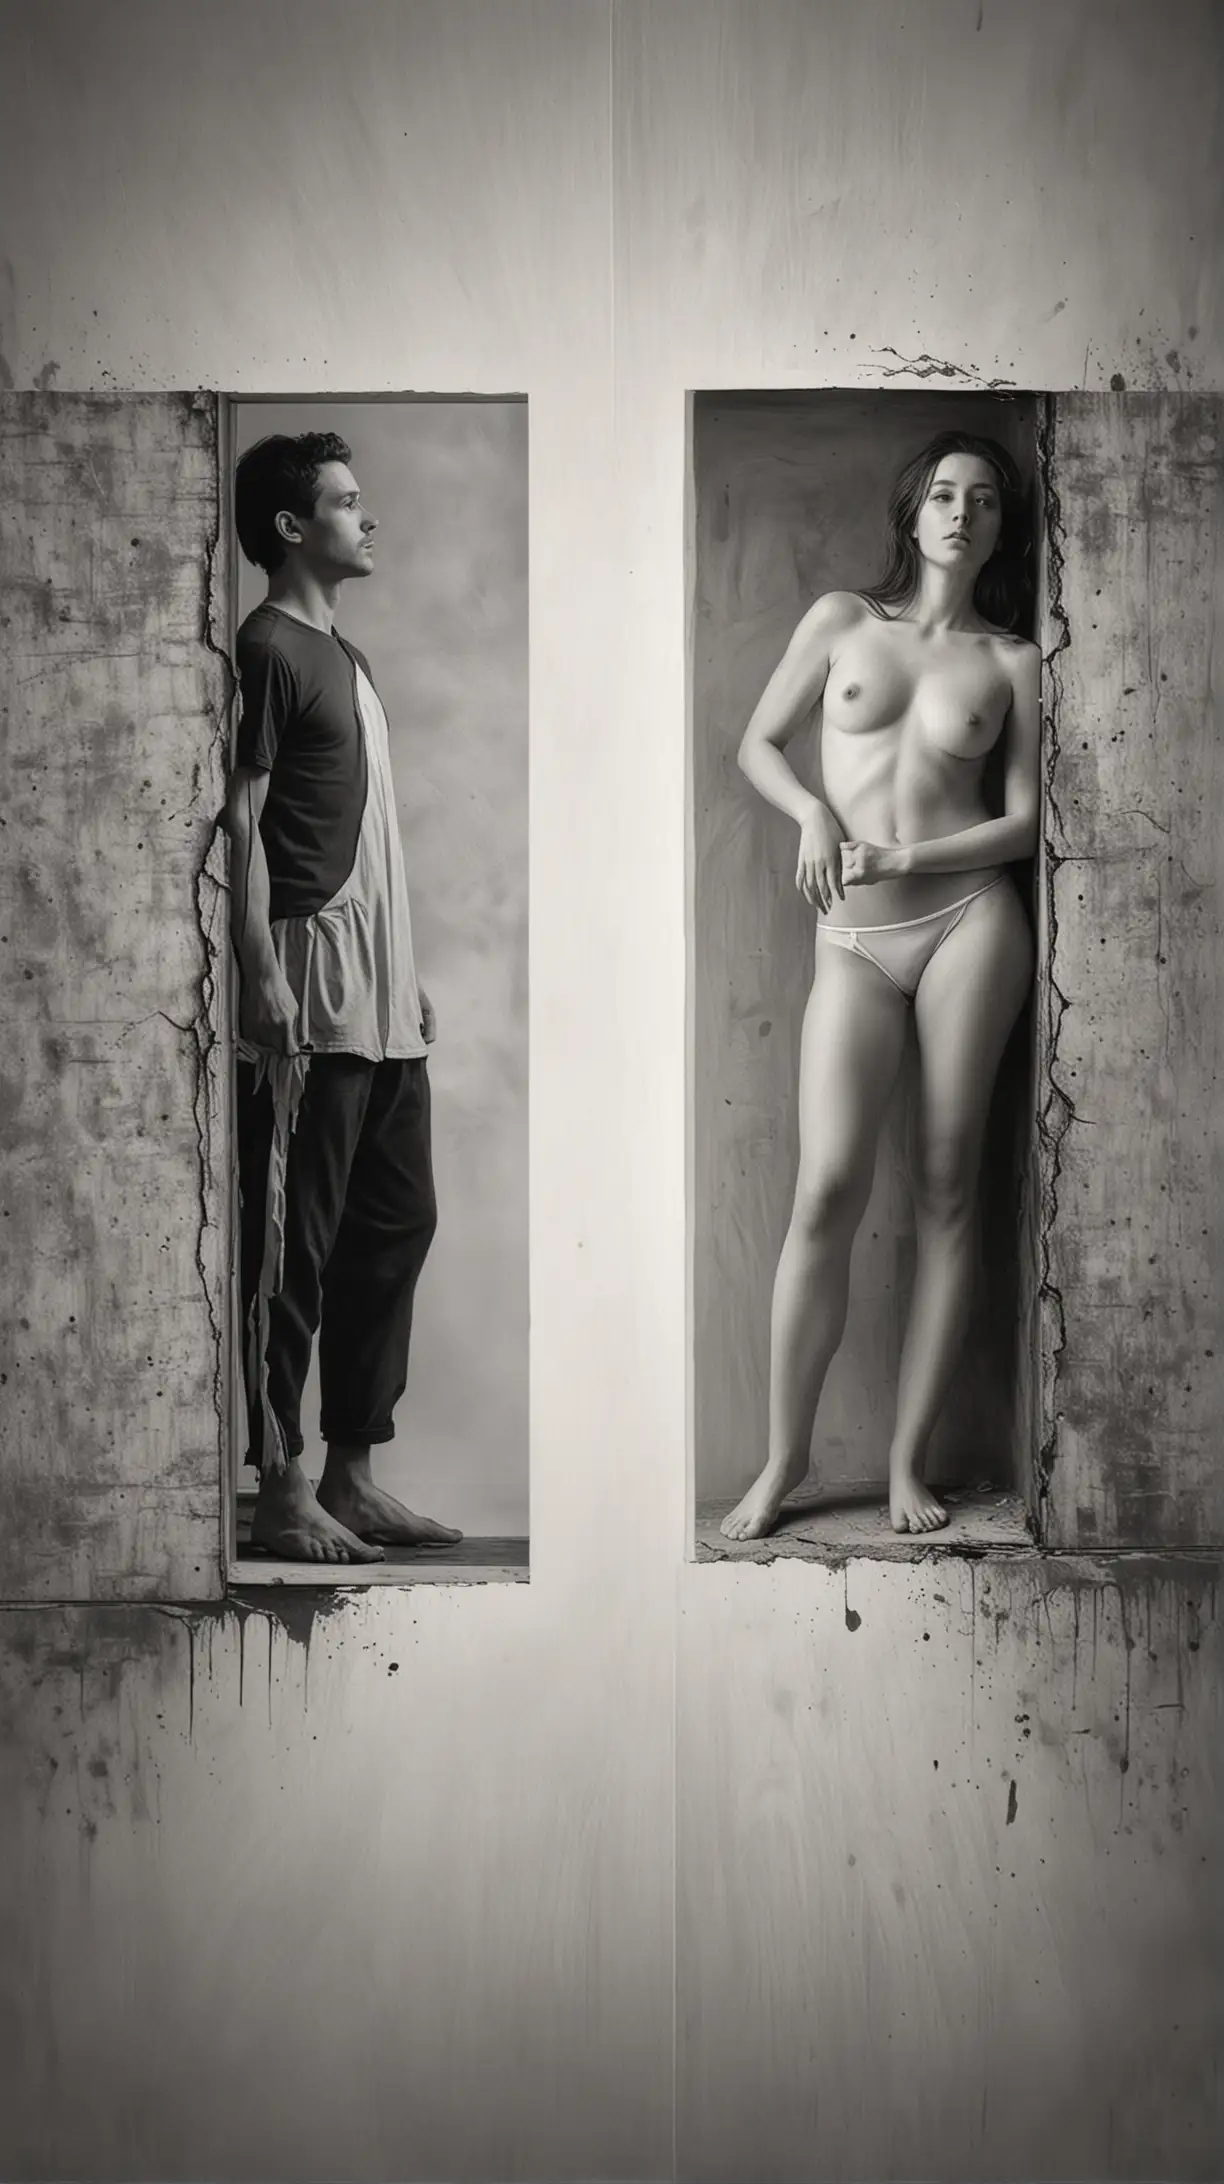 hyper realistic photography
stories became art in heaven by angels
A photorealistic image of a person's life, split into two halves: the left half is a hyperrealistic photo capturing a moment in time, while the right half is a black and white 2D painting depicting the same scene in a stylized, artistic manner.